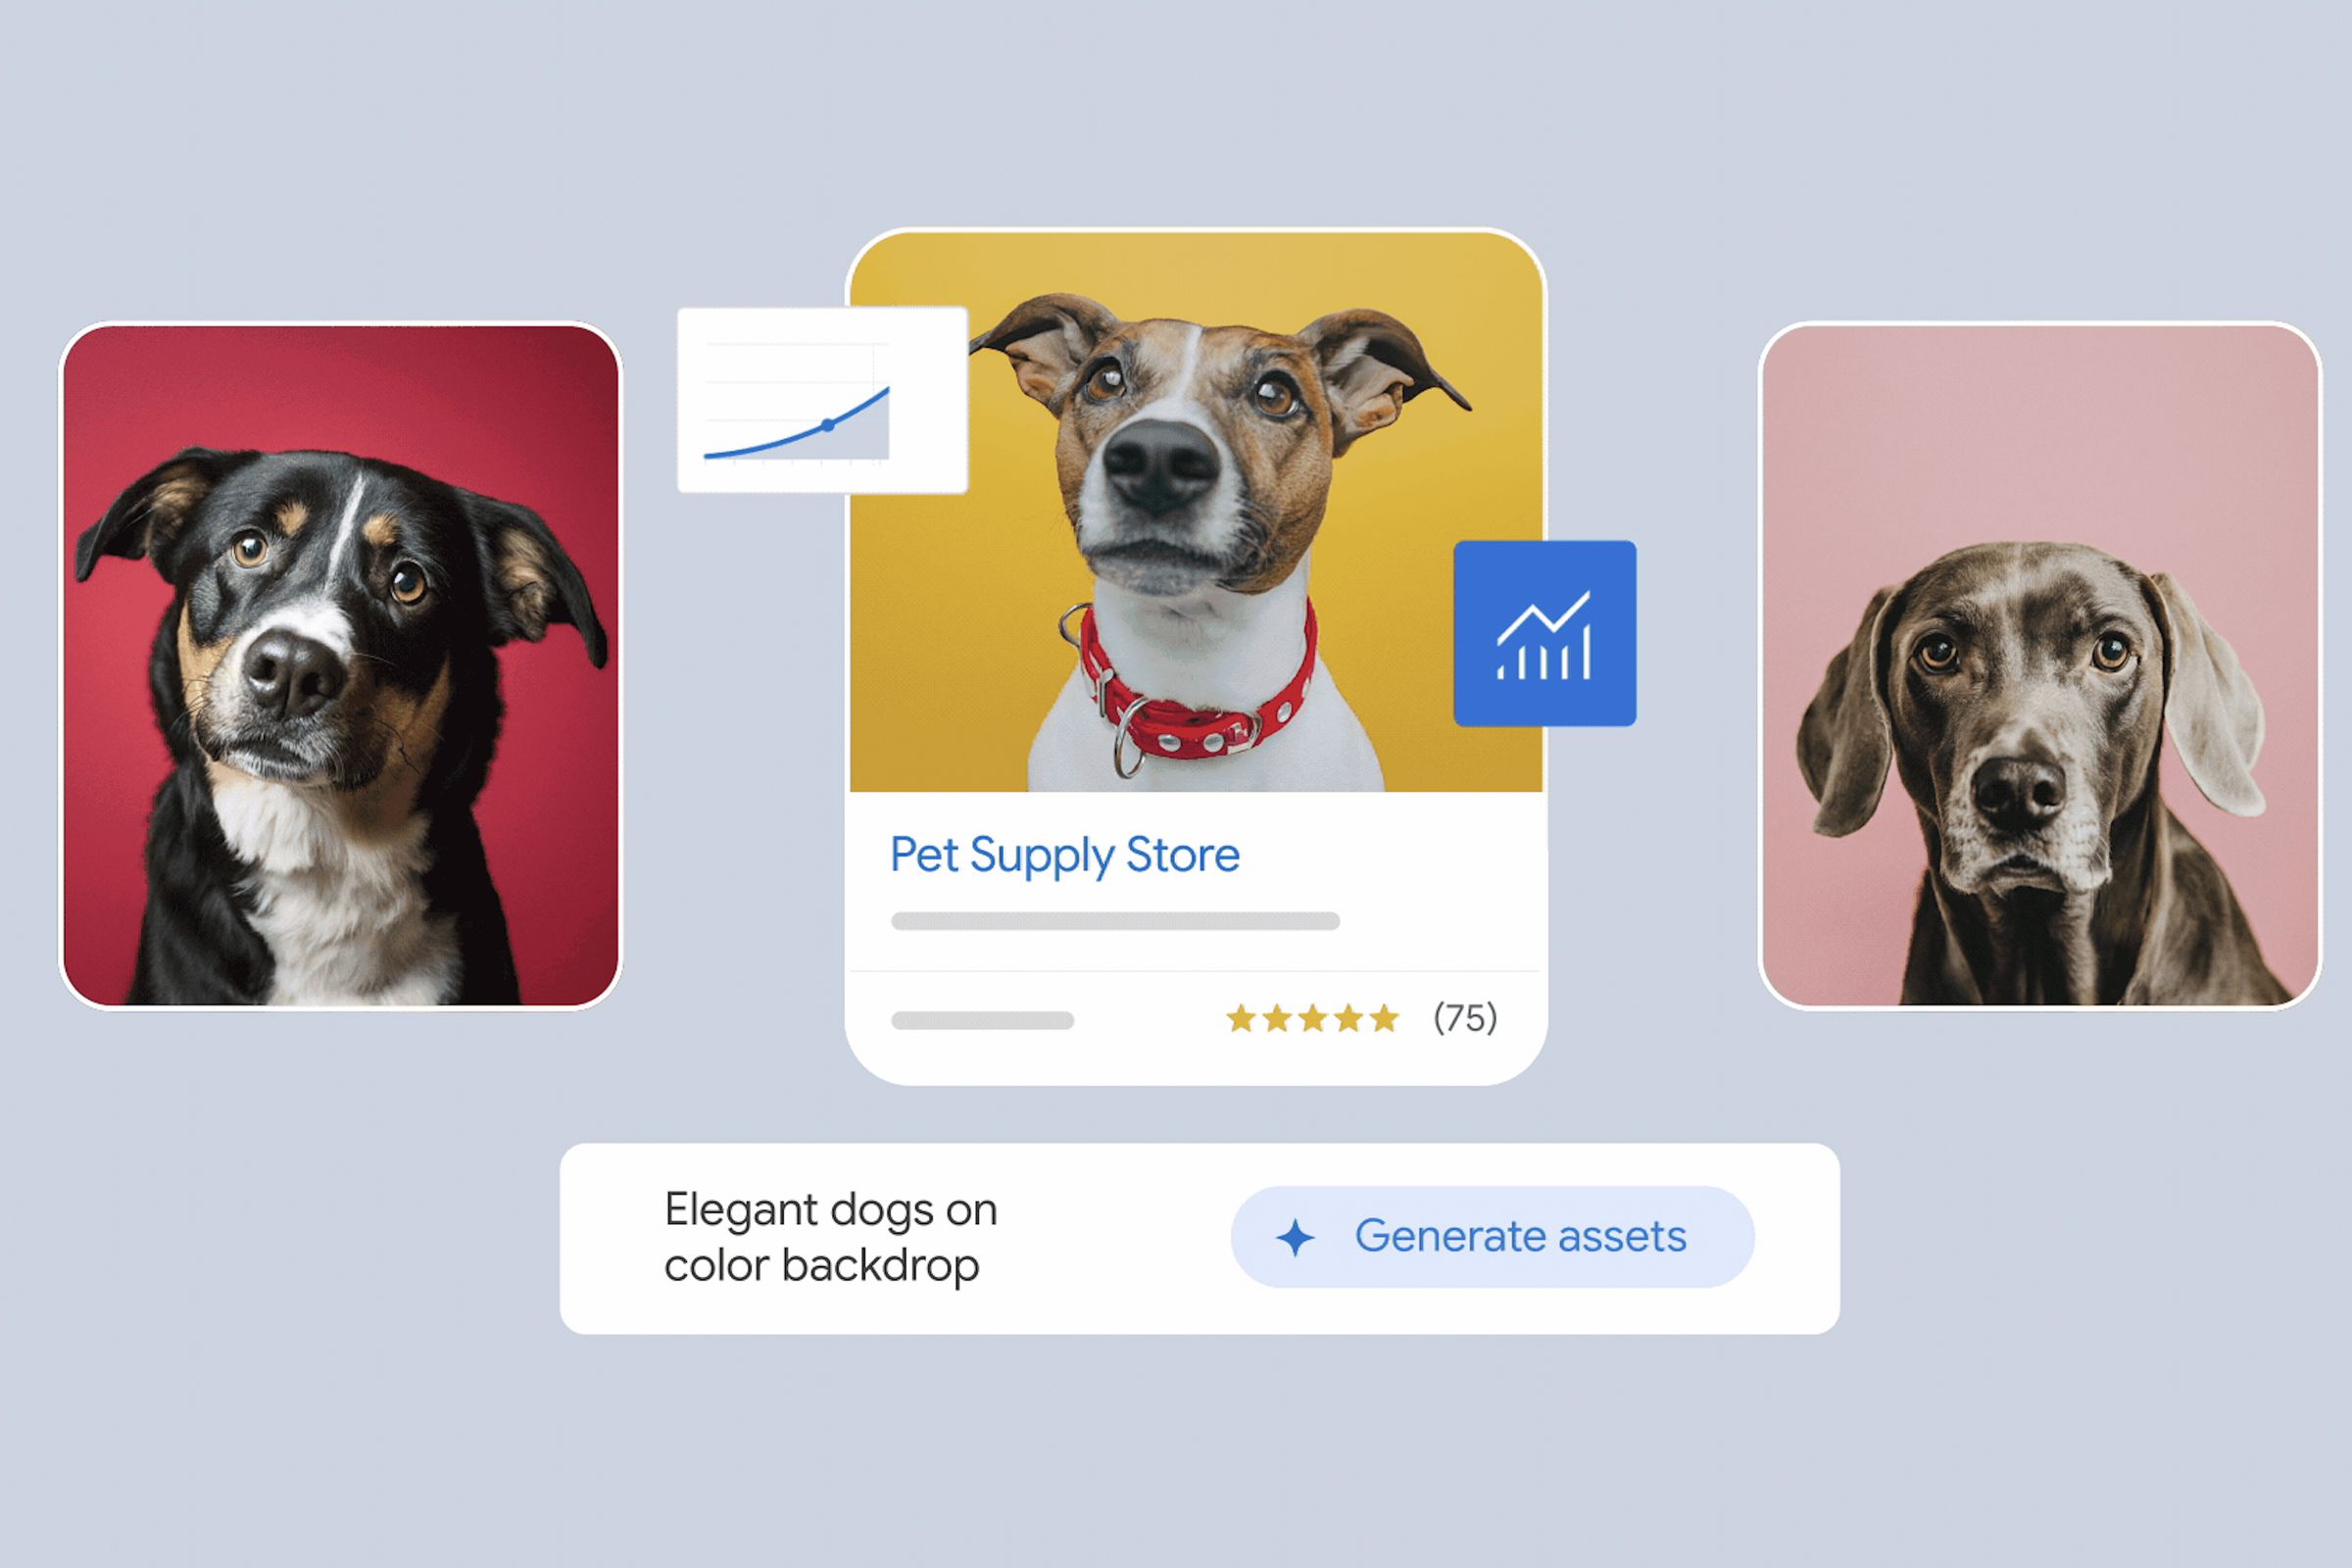 three dogs in colorful backgrounds, a prompt that says “elegant dogs on color backdrop” with a button that says generate assets.